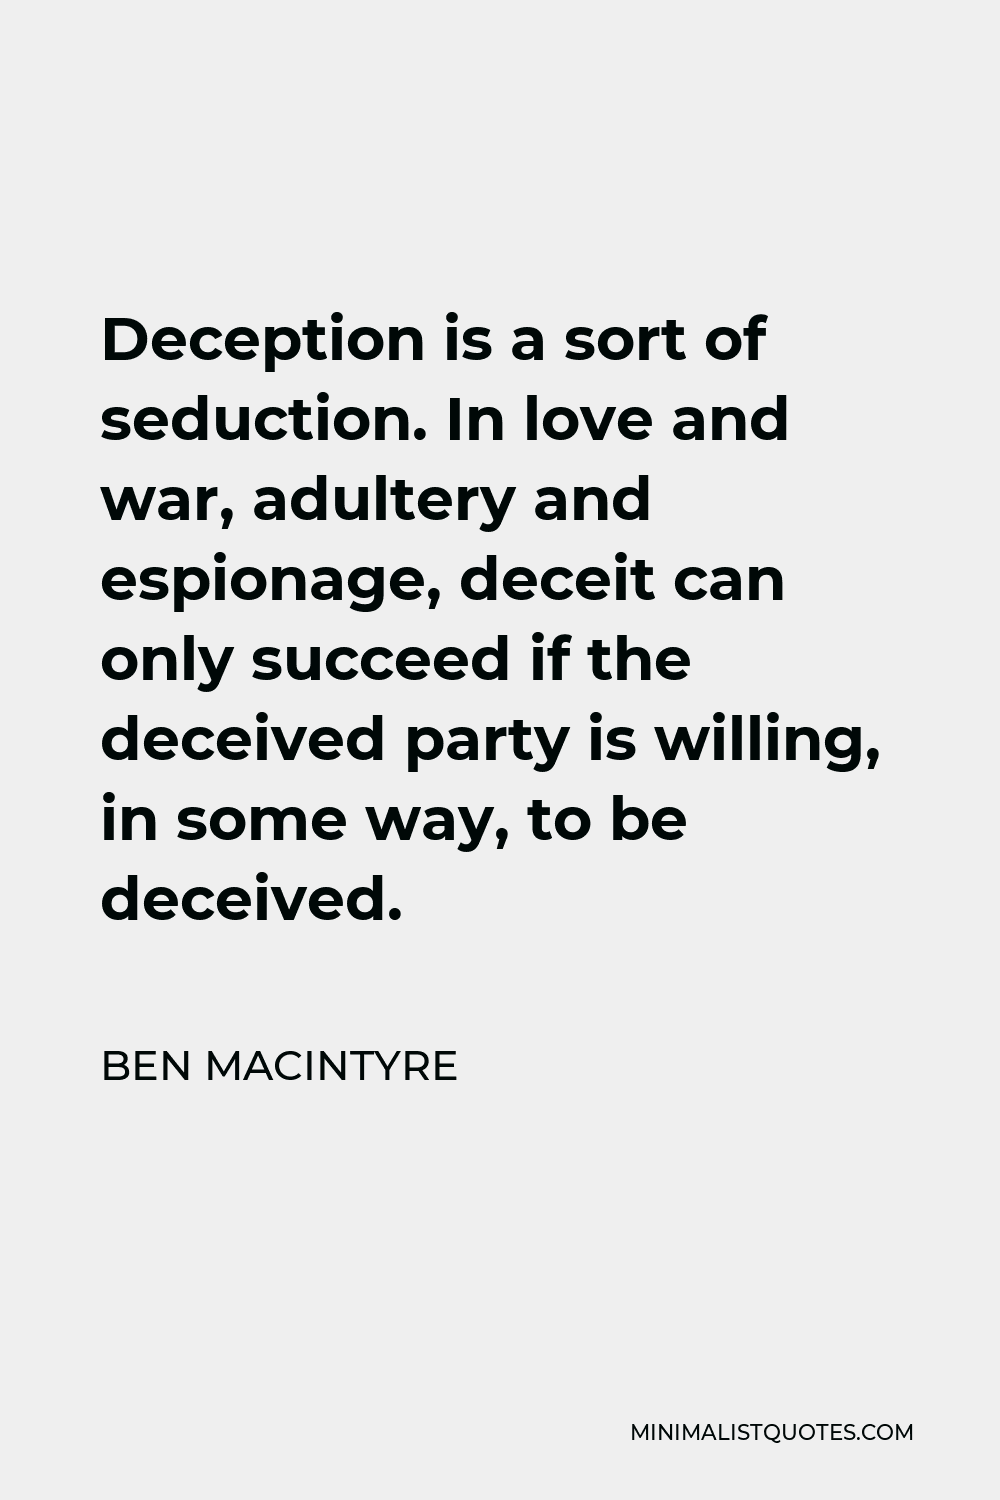 Ben Macintyre Quote - Deception is a sort of seduction. In love and war, adultery and espionage, deceit can only succeed if the deceived party is willing, in some way, to be deceived.